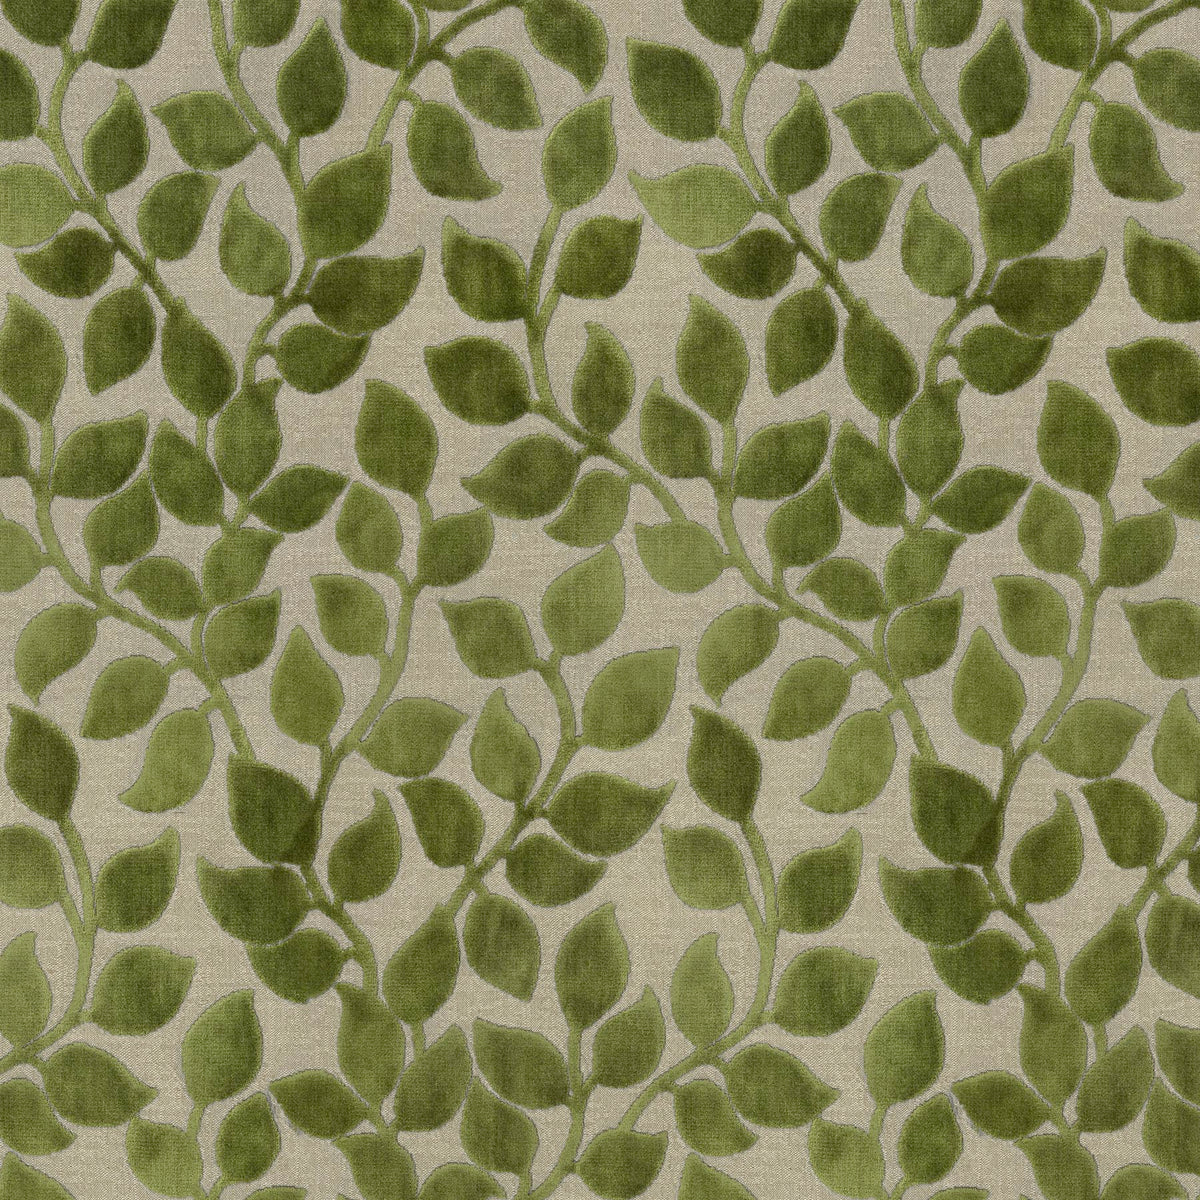 P/K Lifestyles Lovely Leaf - Forest 411262 Upholstery Fabric